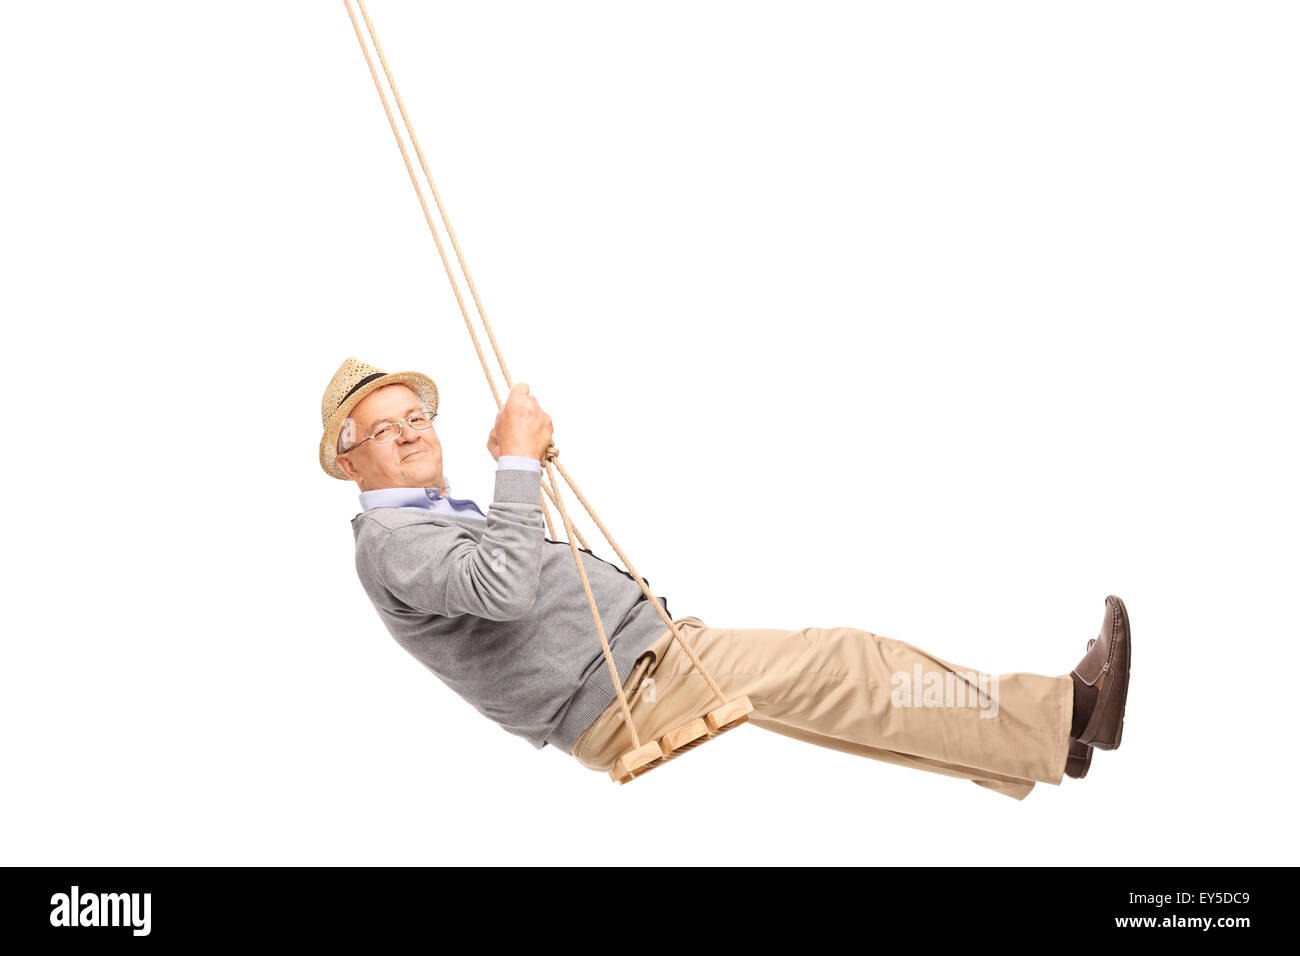 Carefree senior man swinging on a wooden swing and looking at the camera isolated on white background Stock Photo